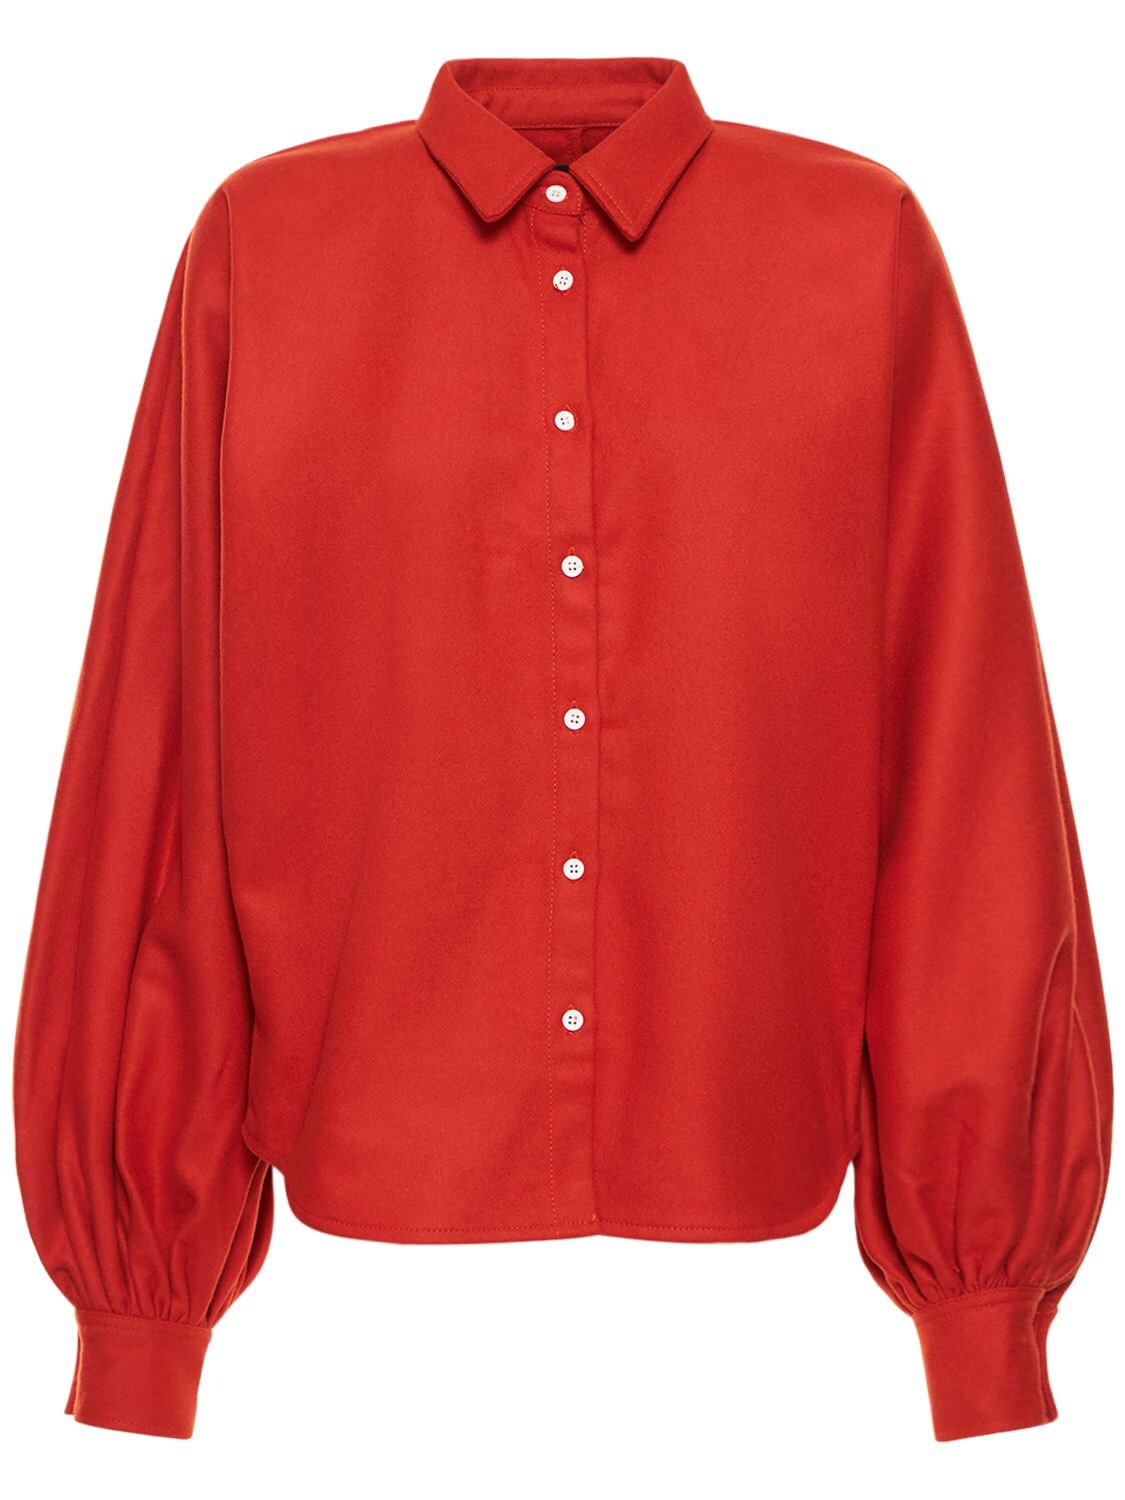 MADE IN TOMBOY Claire Wool Balloon Sleeves Shirt